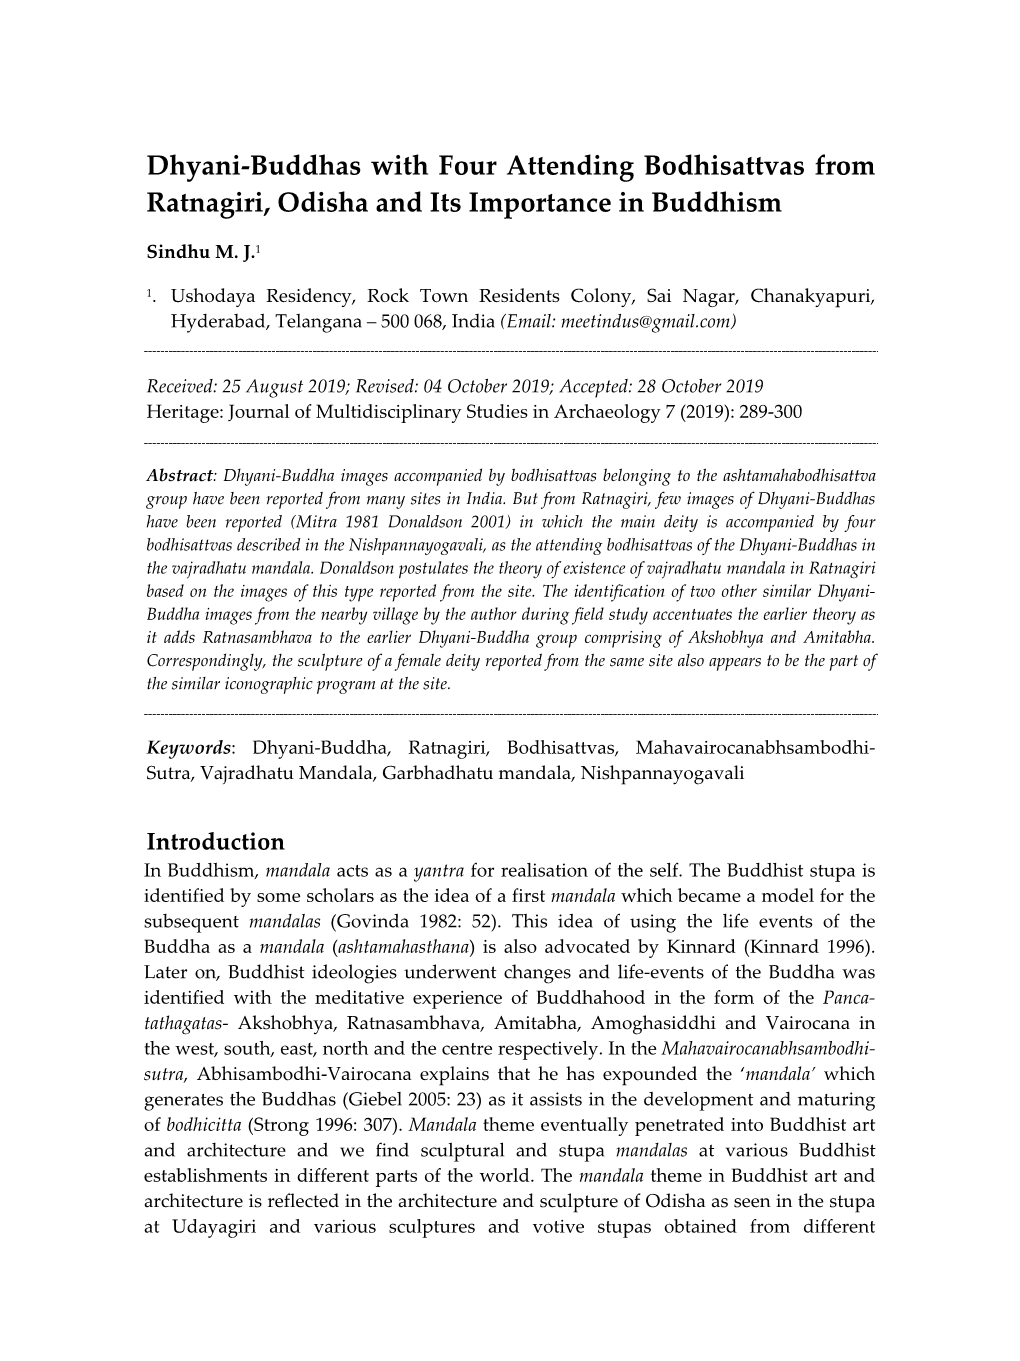 Dhyani-Buddhas with Four Attending Bodhisattvas from Ratnagiri, Odisha and Its Importance in Buddhism